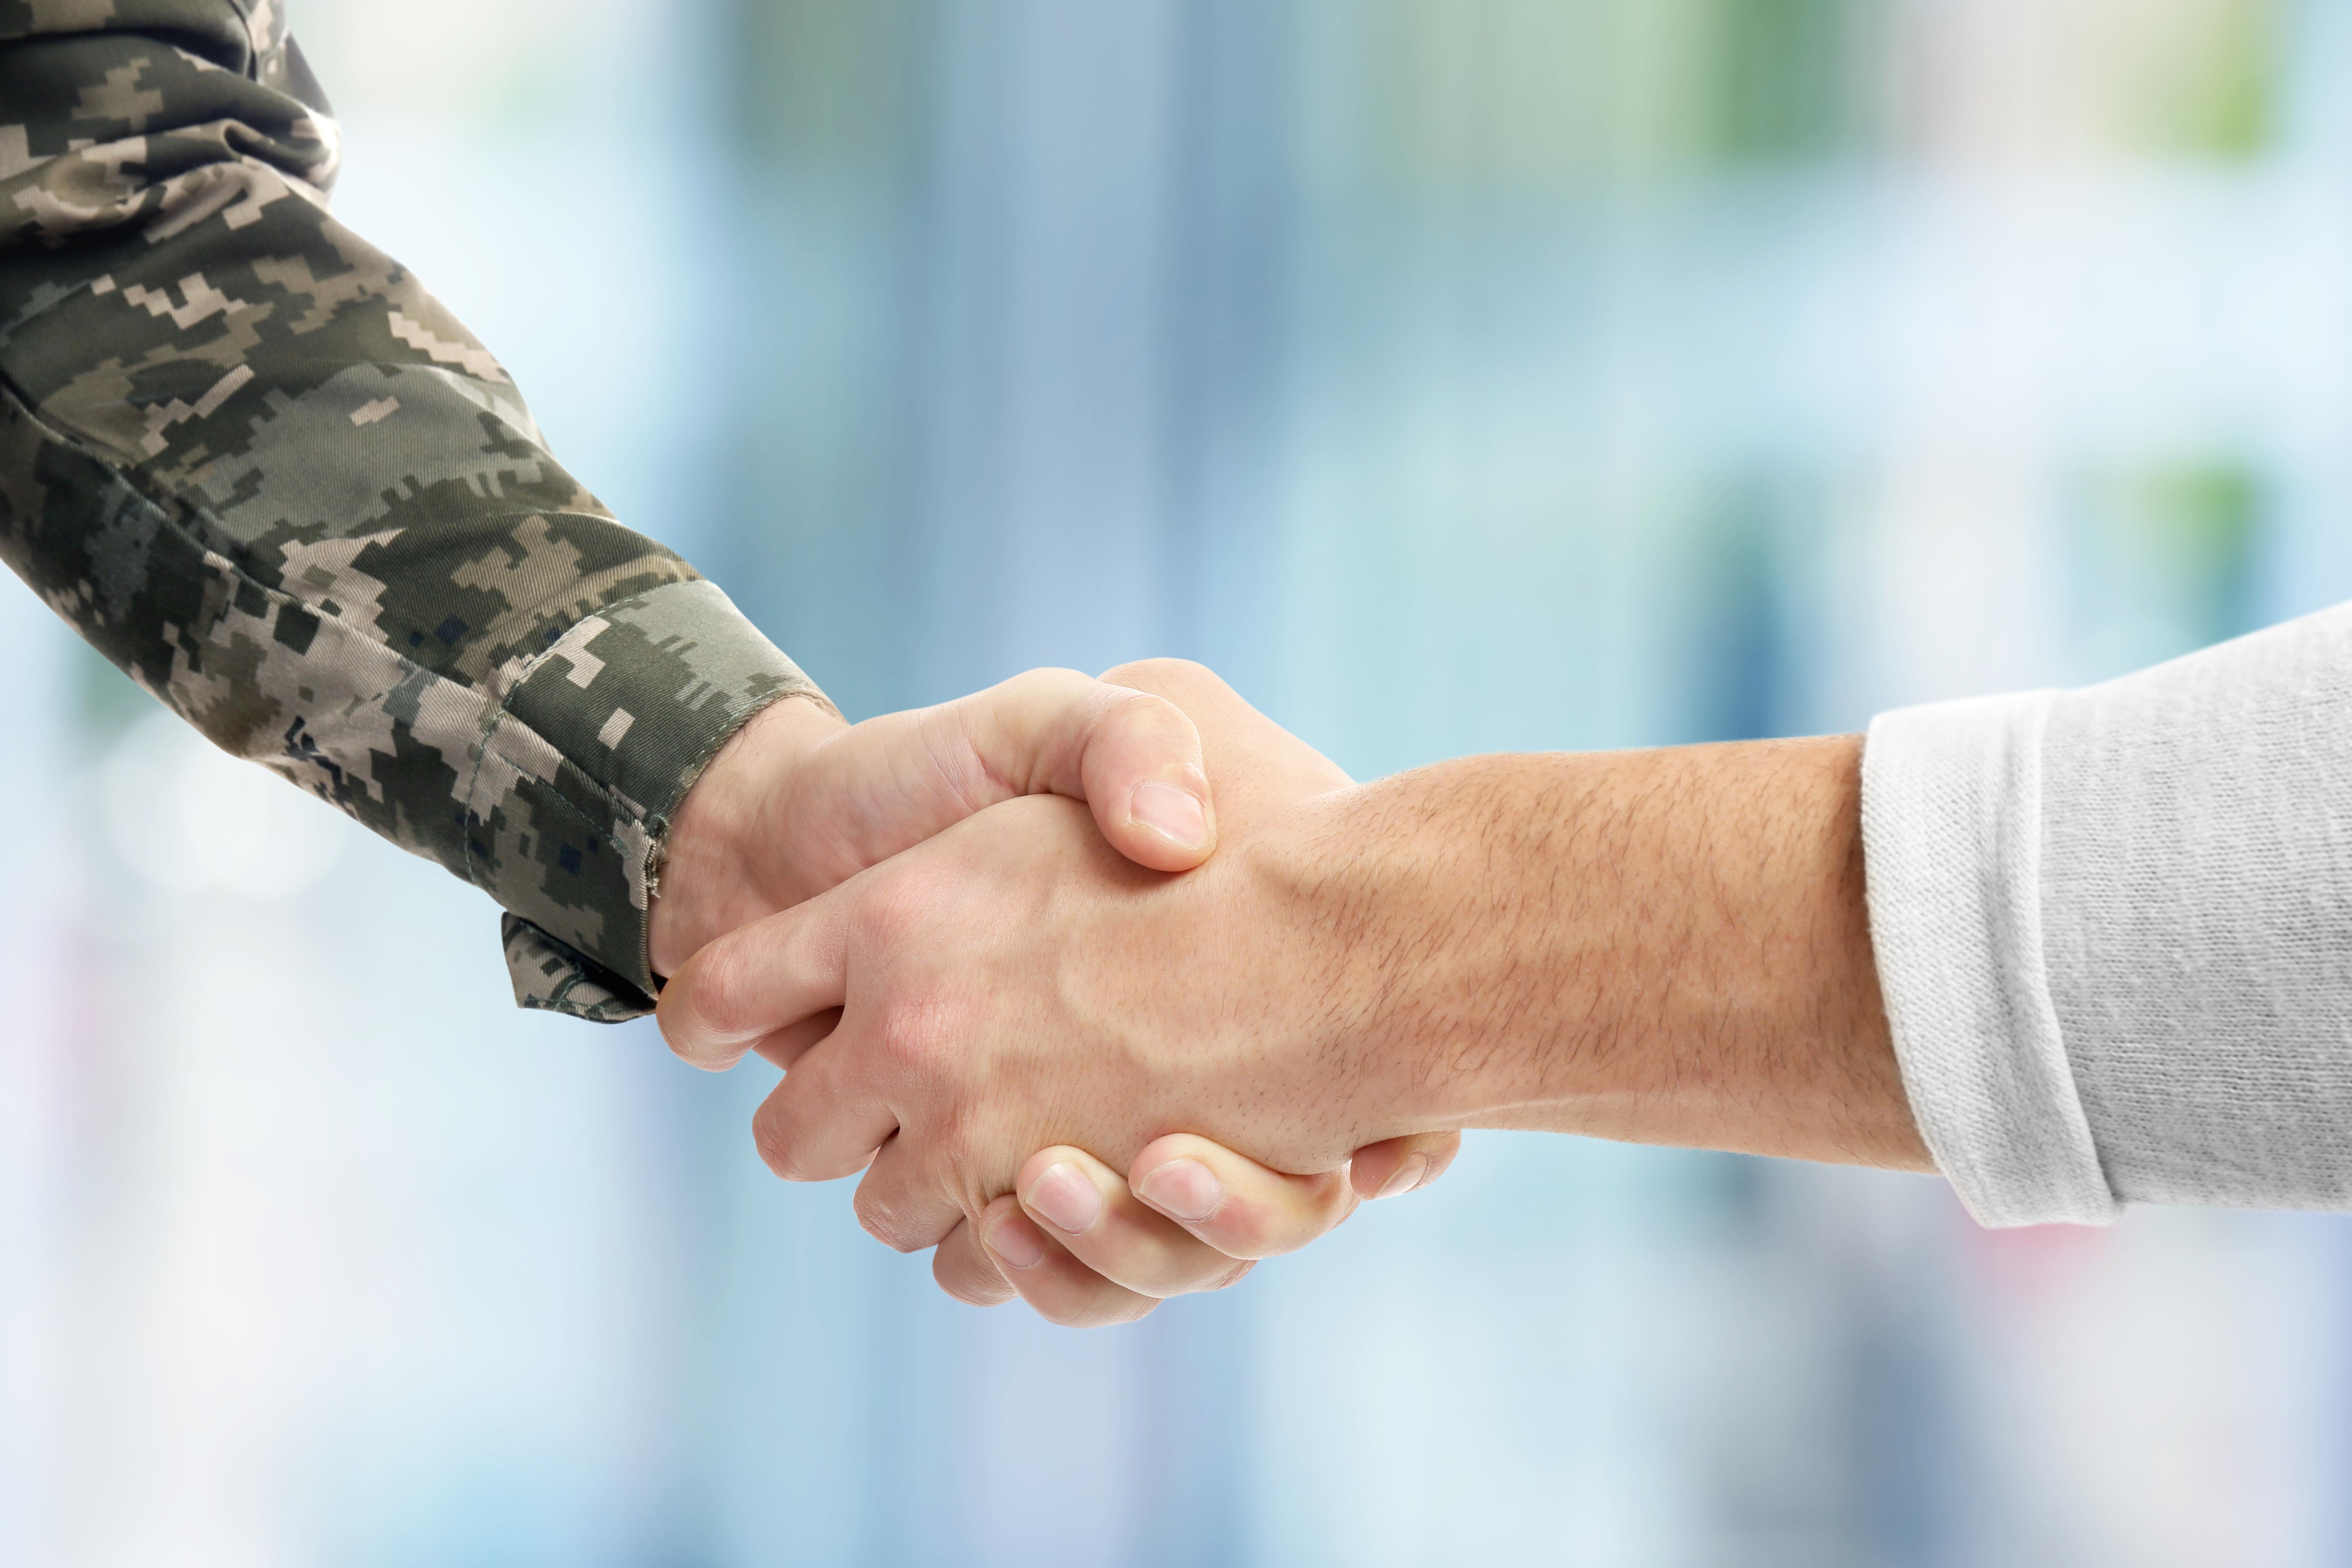 A handshake, with one person wearing military fatigues